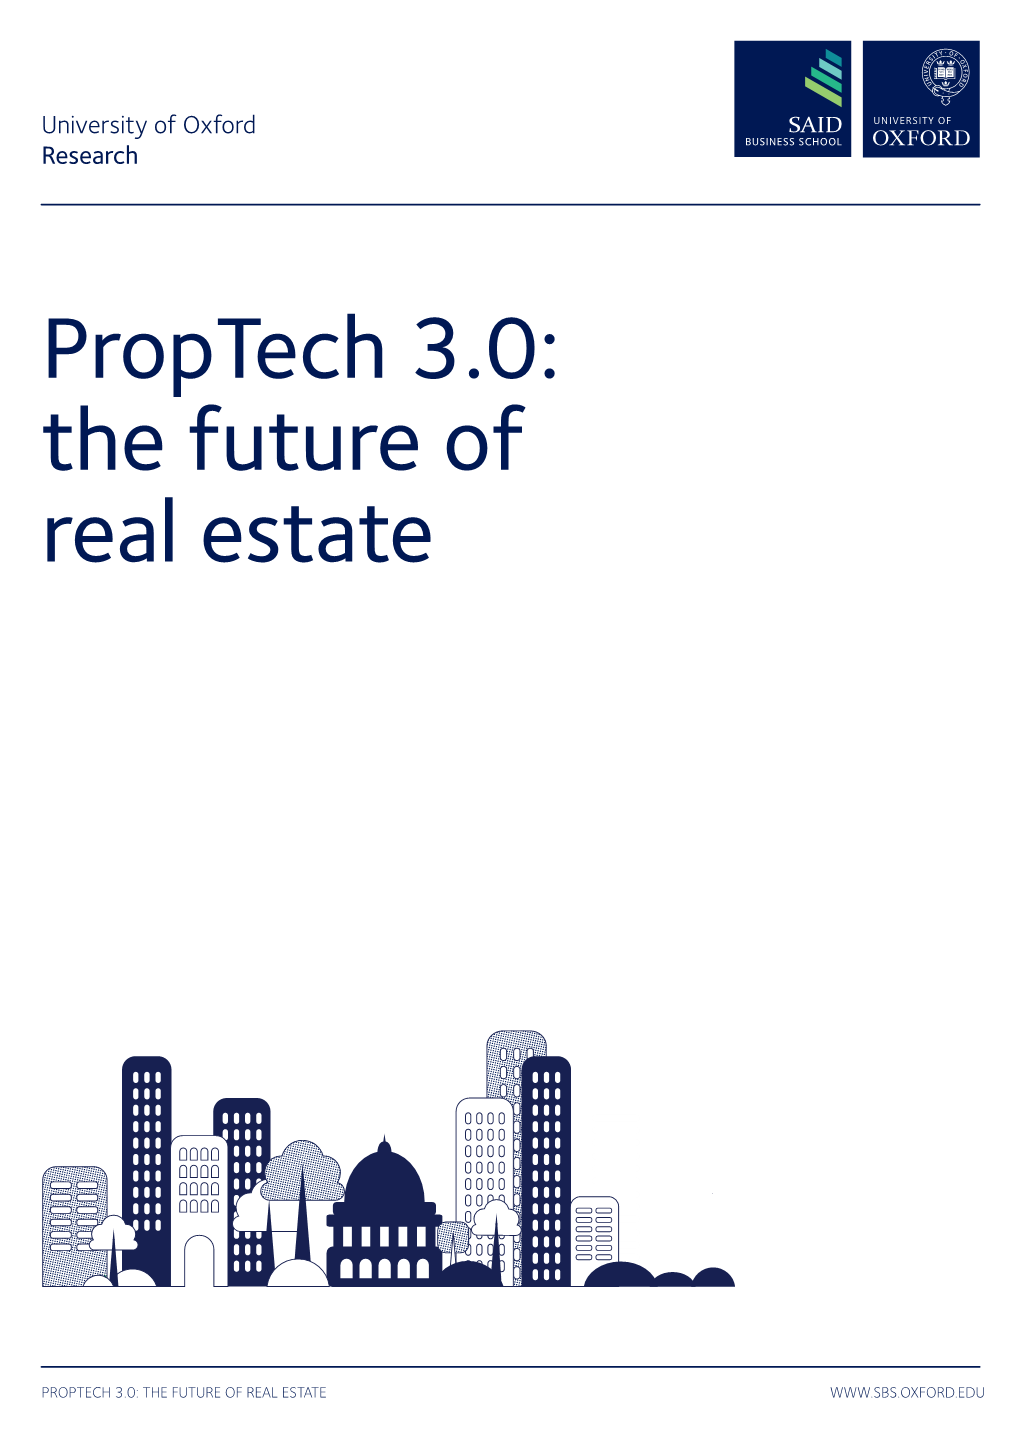 Proptech 3.0: the Future of Real Estate